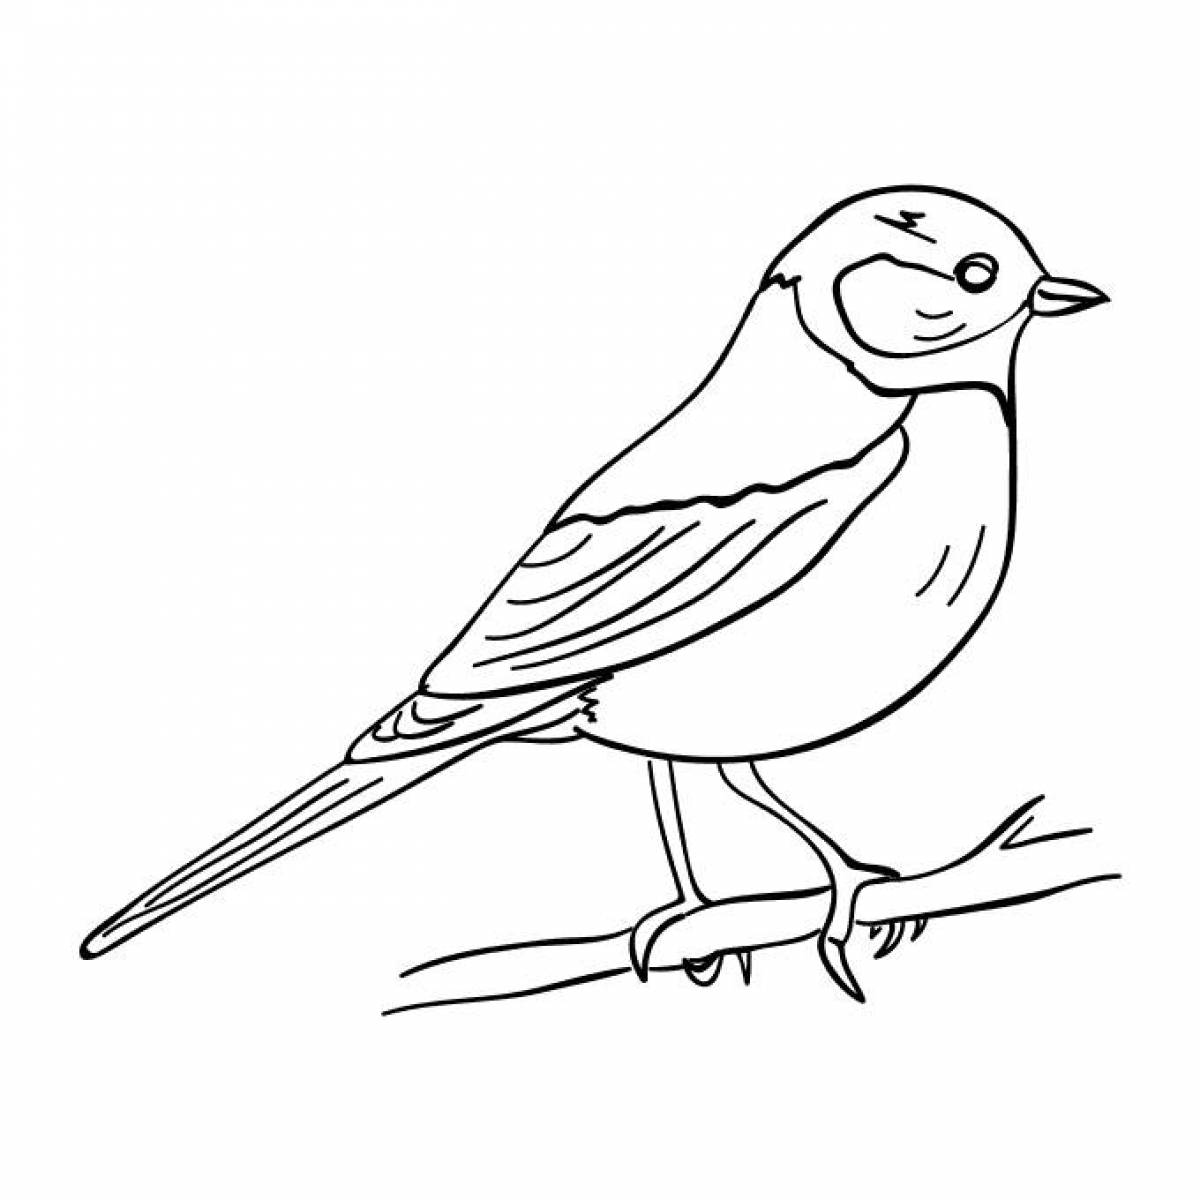 Download bullfinch coloring page